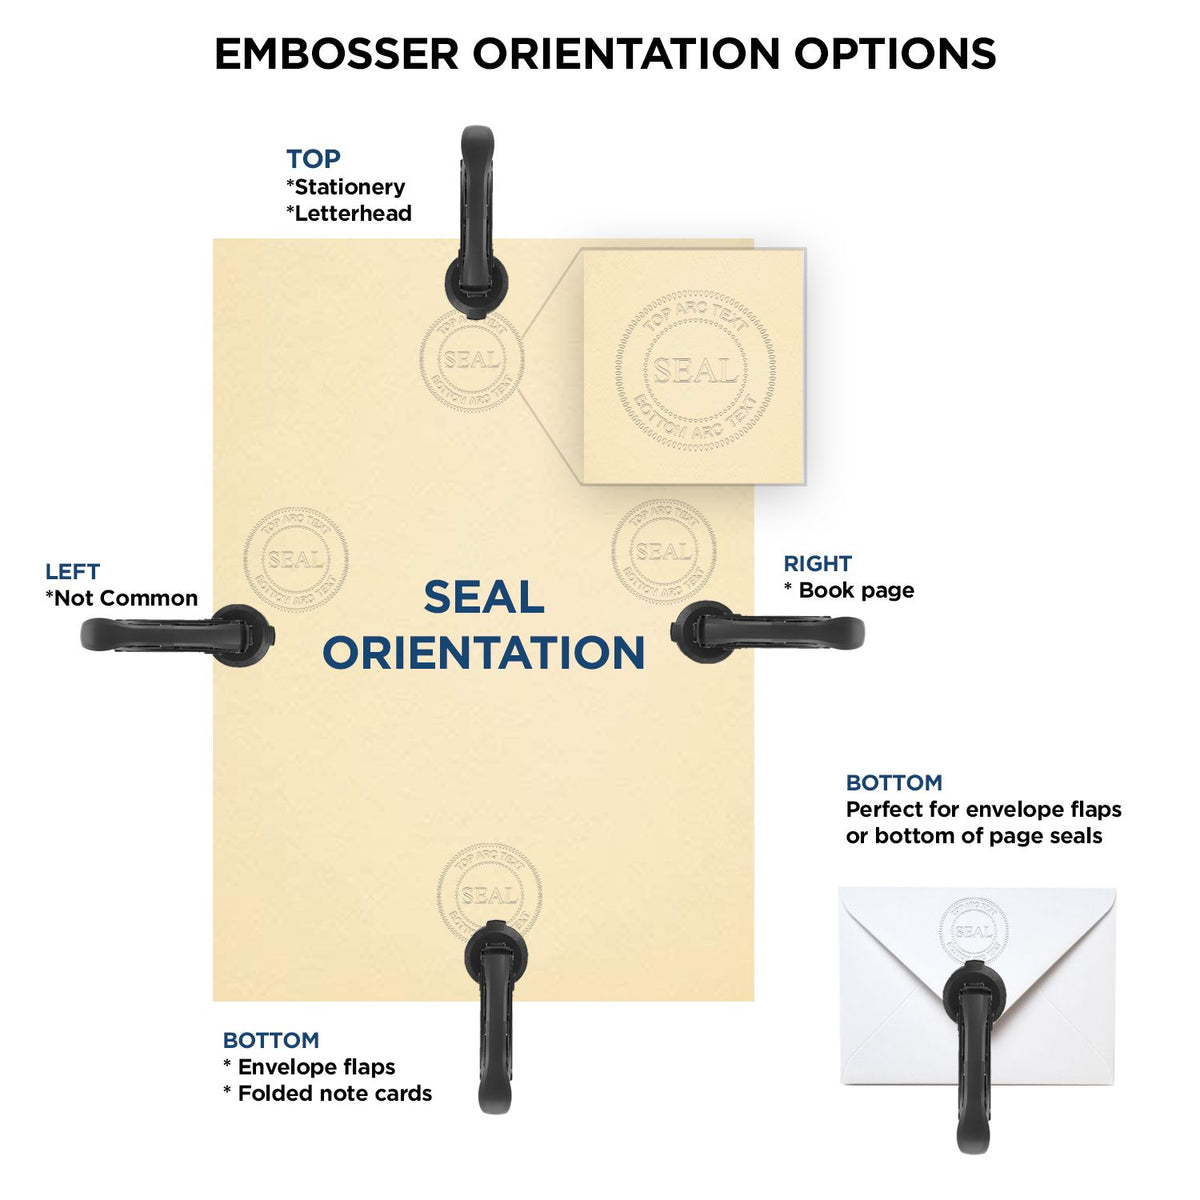 An infographic for the Handheld Maryland Architect Seal Embosser showing embosser orientation, this is showing examples of a top, bottom, right and left insert.